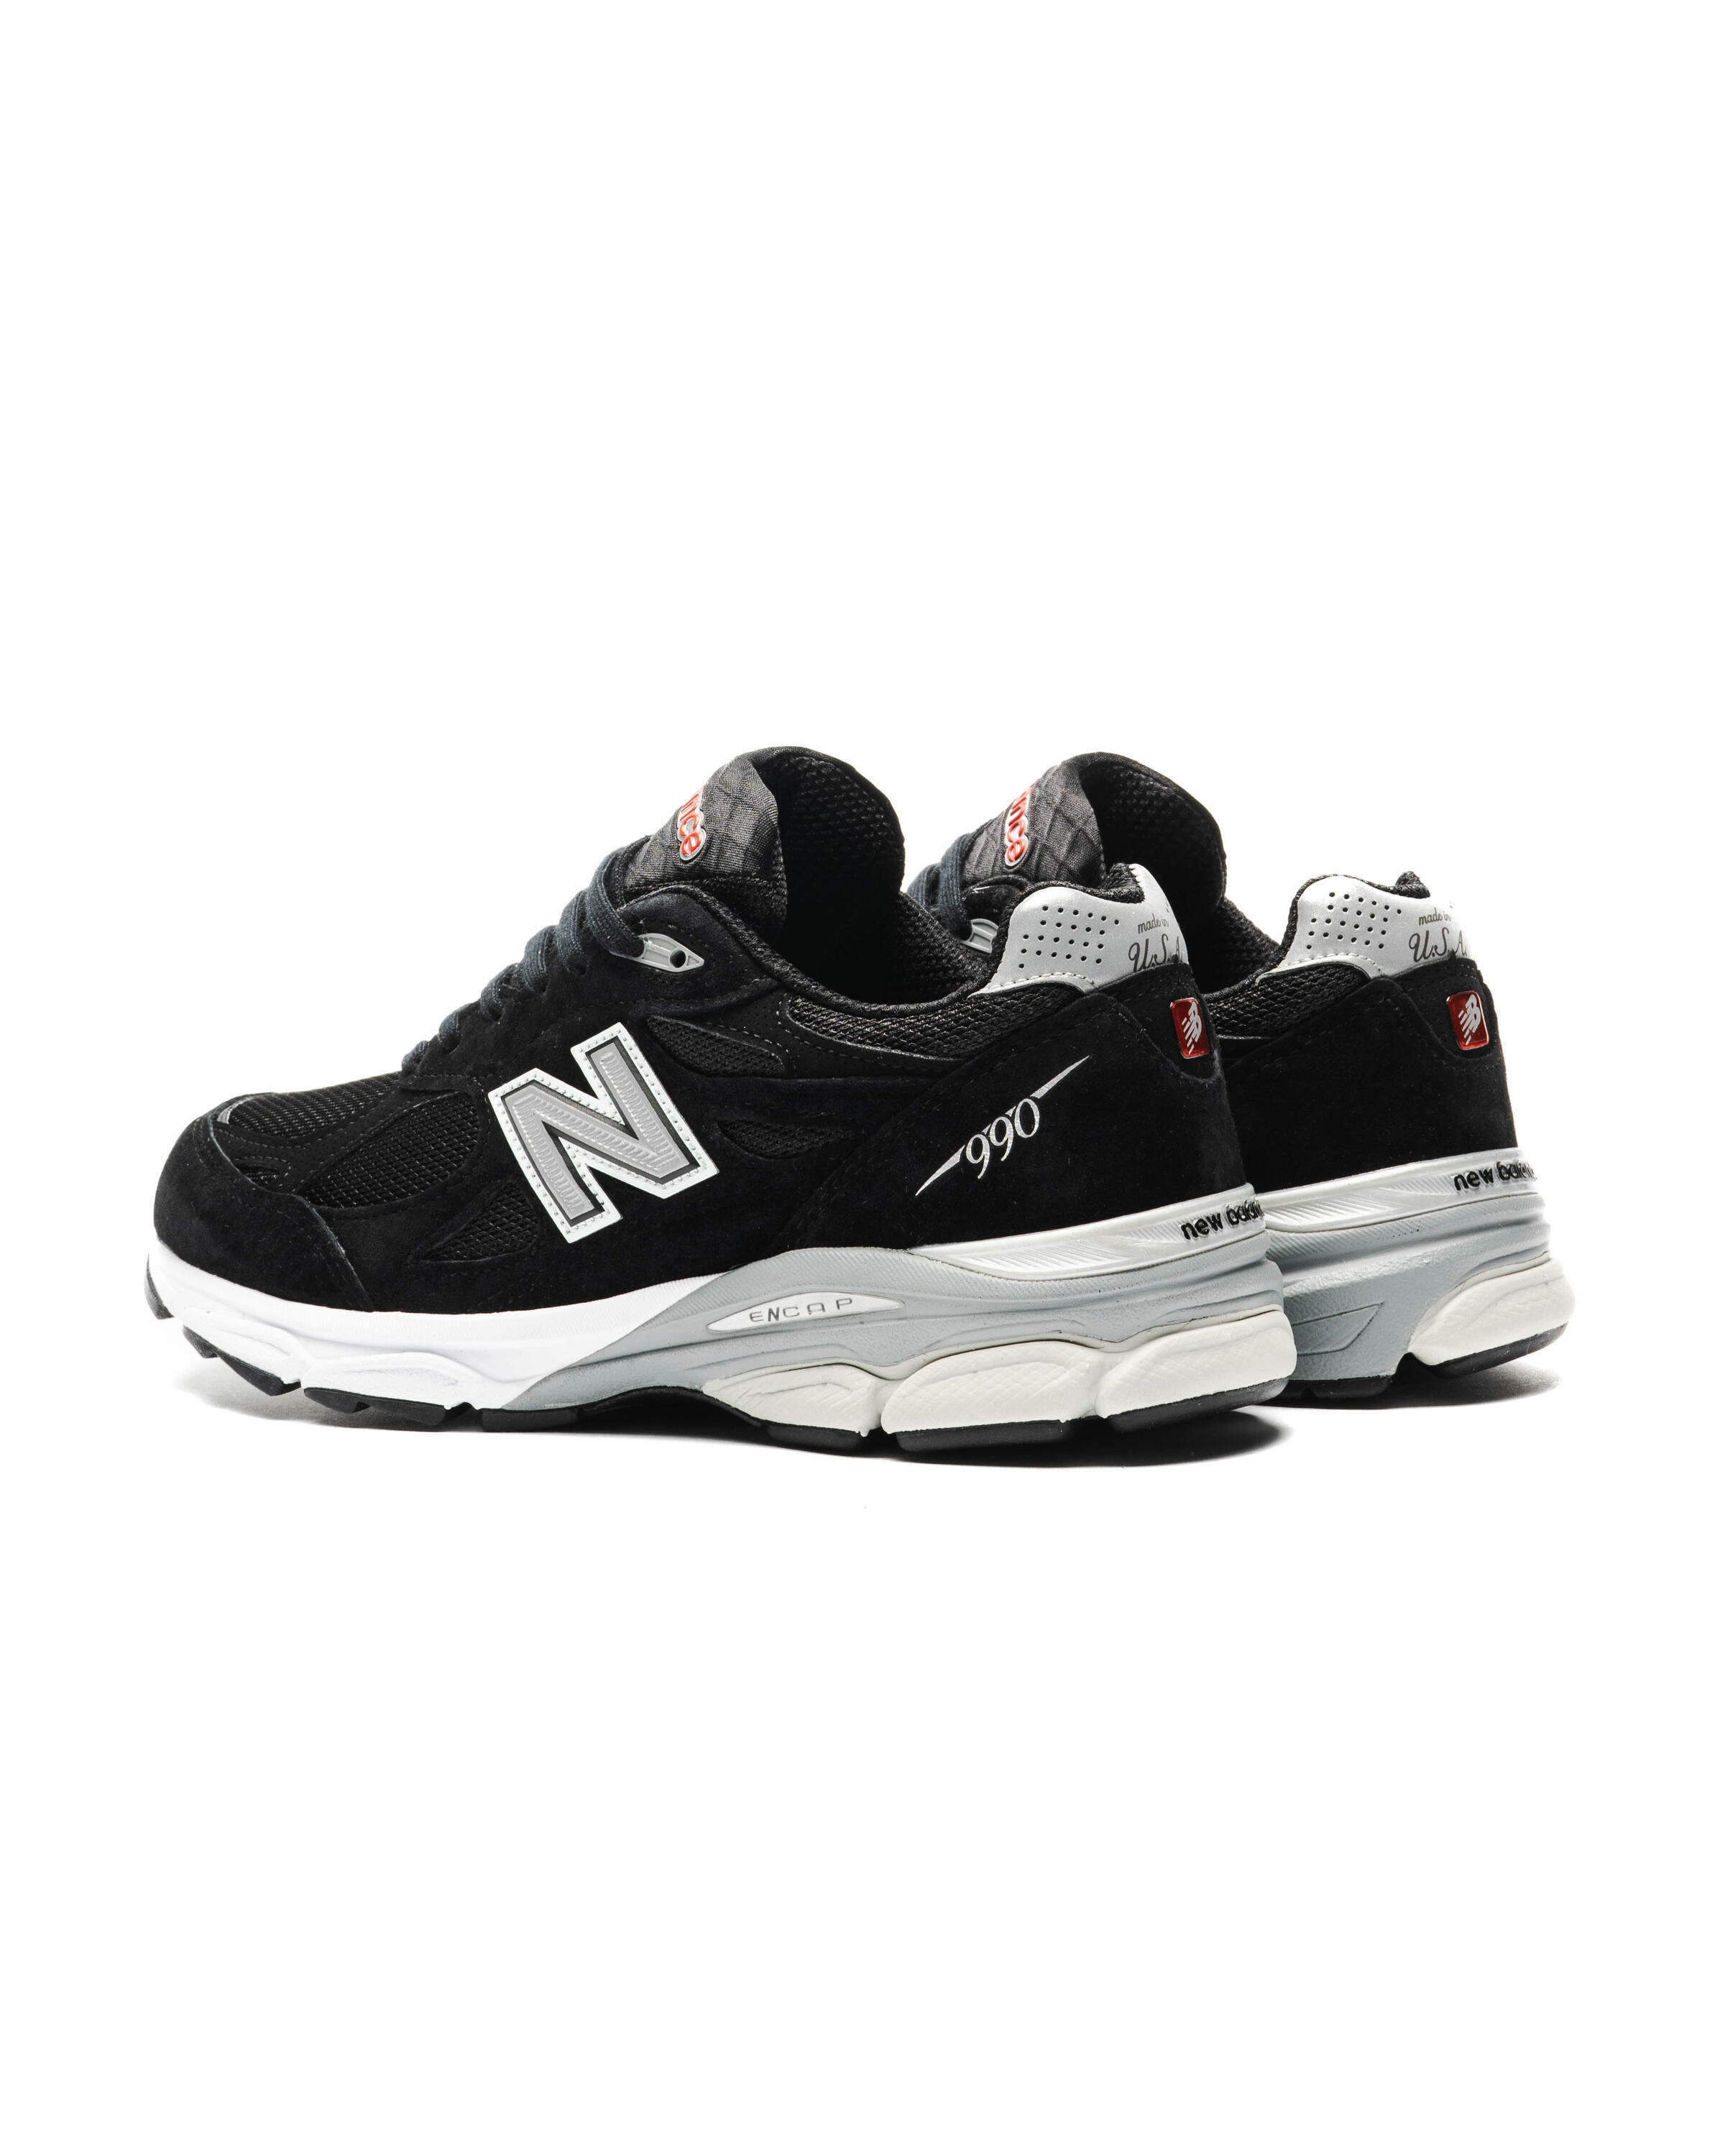 New Balance M 990 BS3 - Made in USA